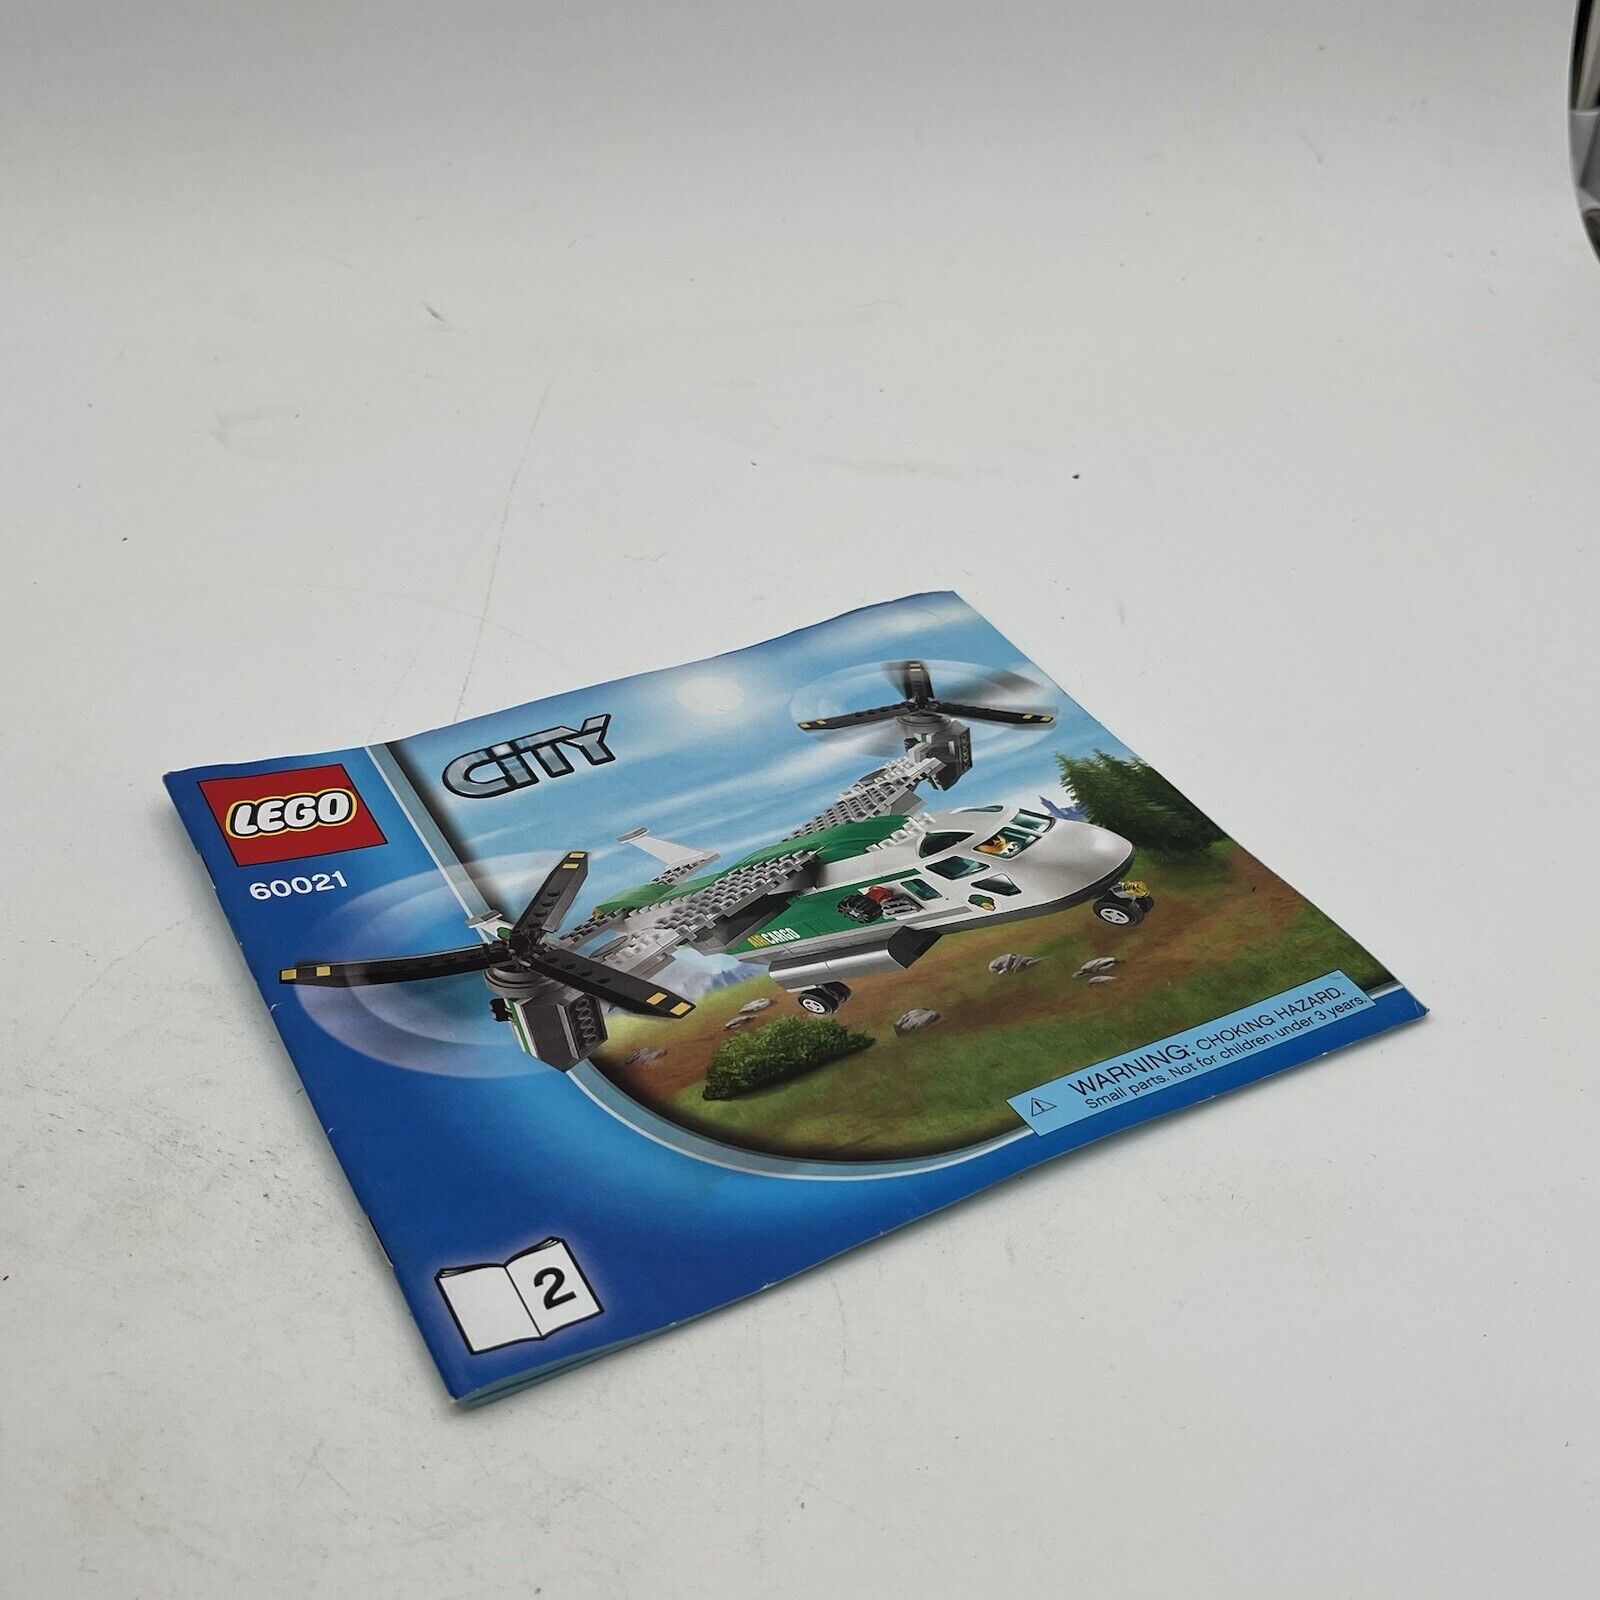 Lego City Instruction Manual Book 2 only 60021 Lumberjack Air Cargo Helicopter